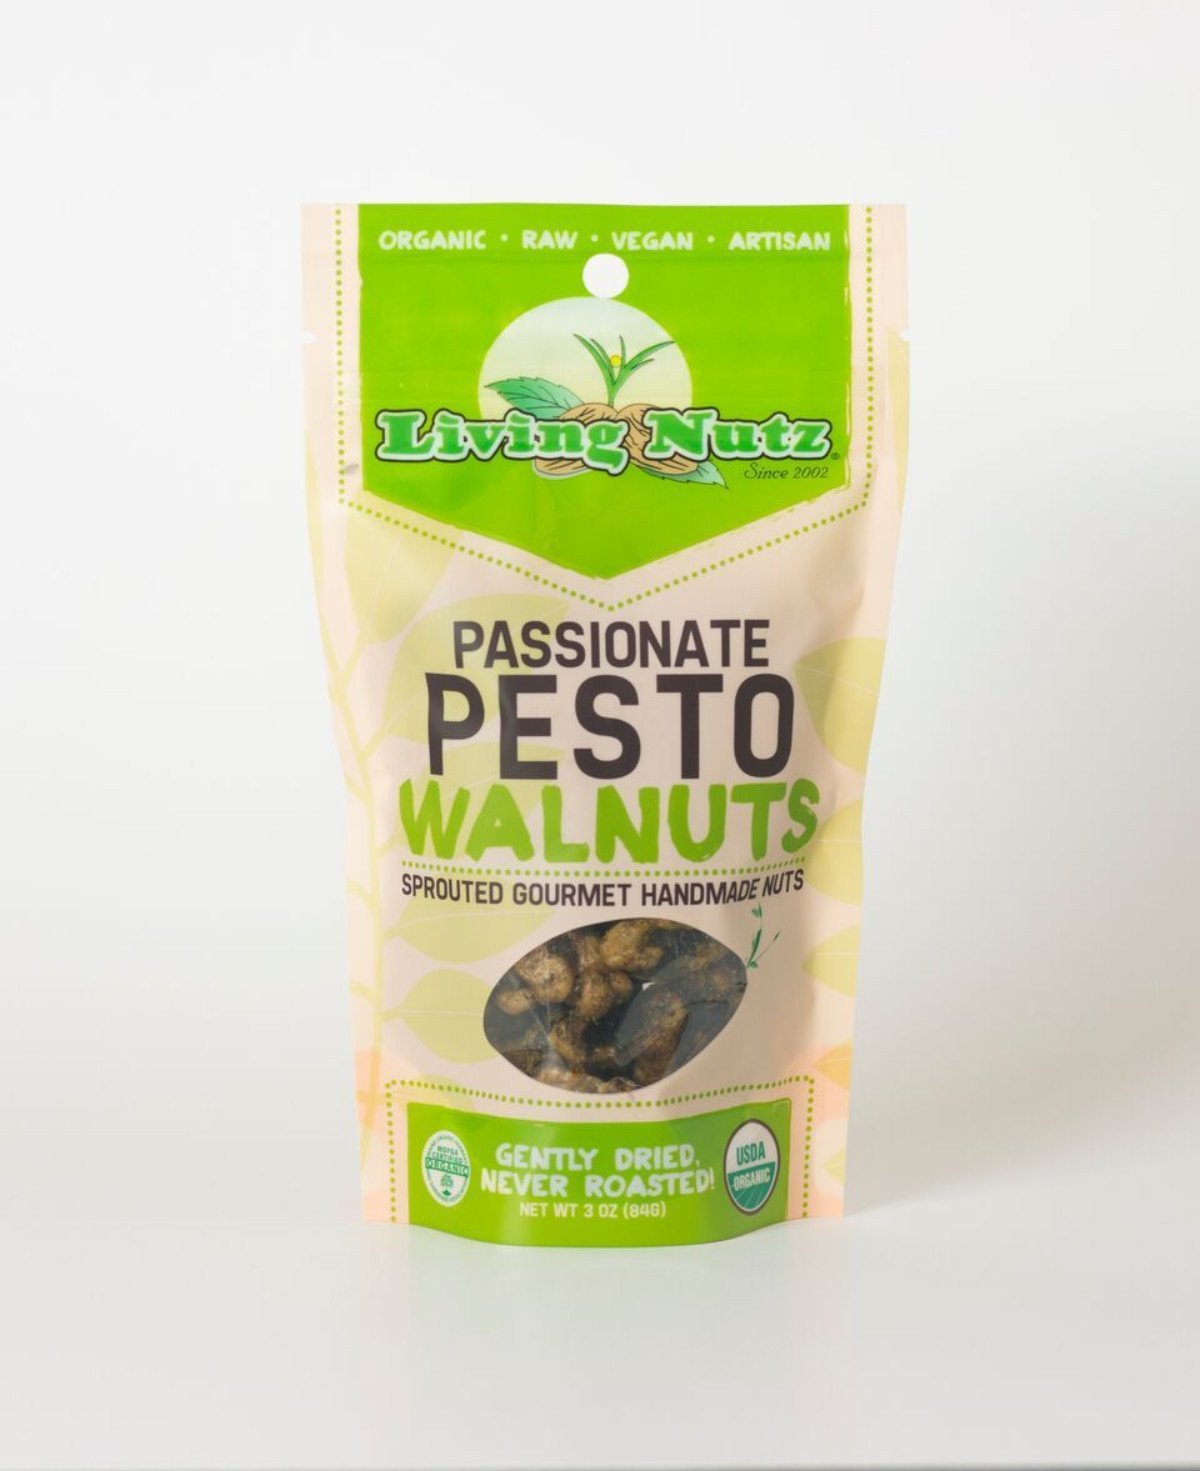 Organic raw sprouted nuts. Sprouted flavored raw walnuts & pesto. Organic nut snacks. Living nuts.